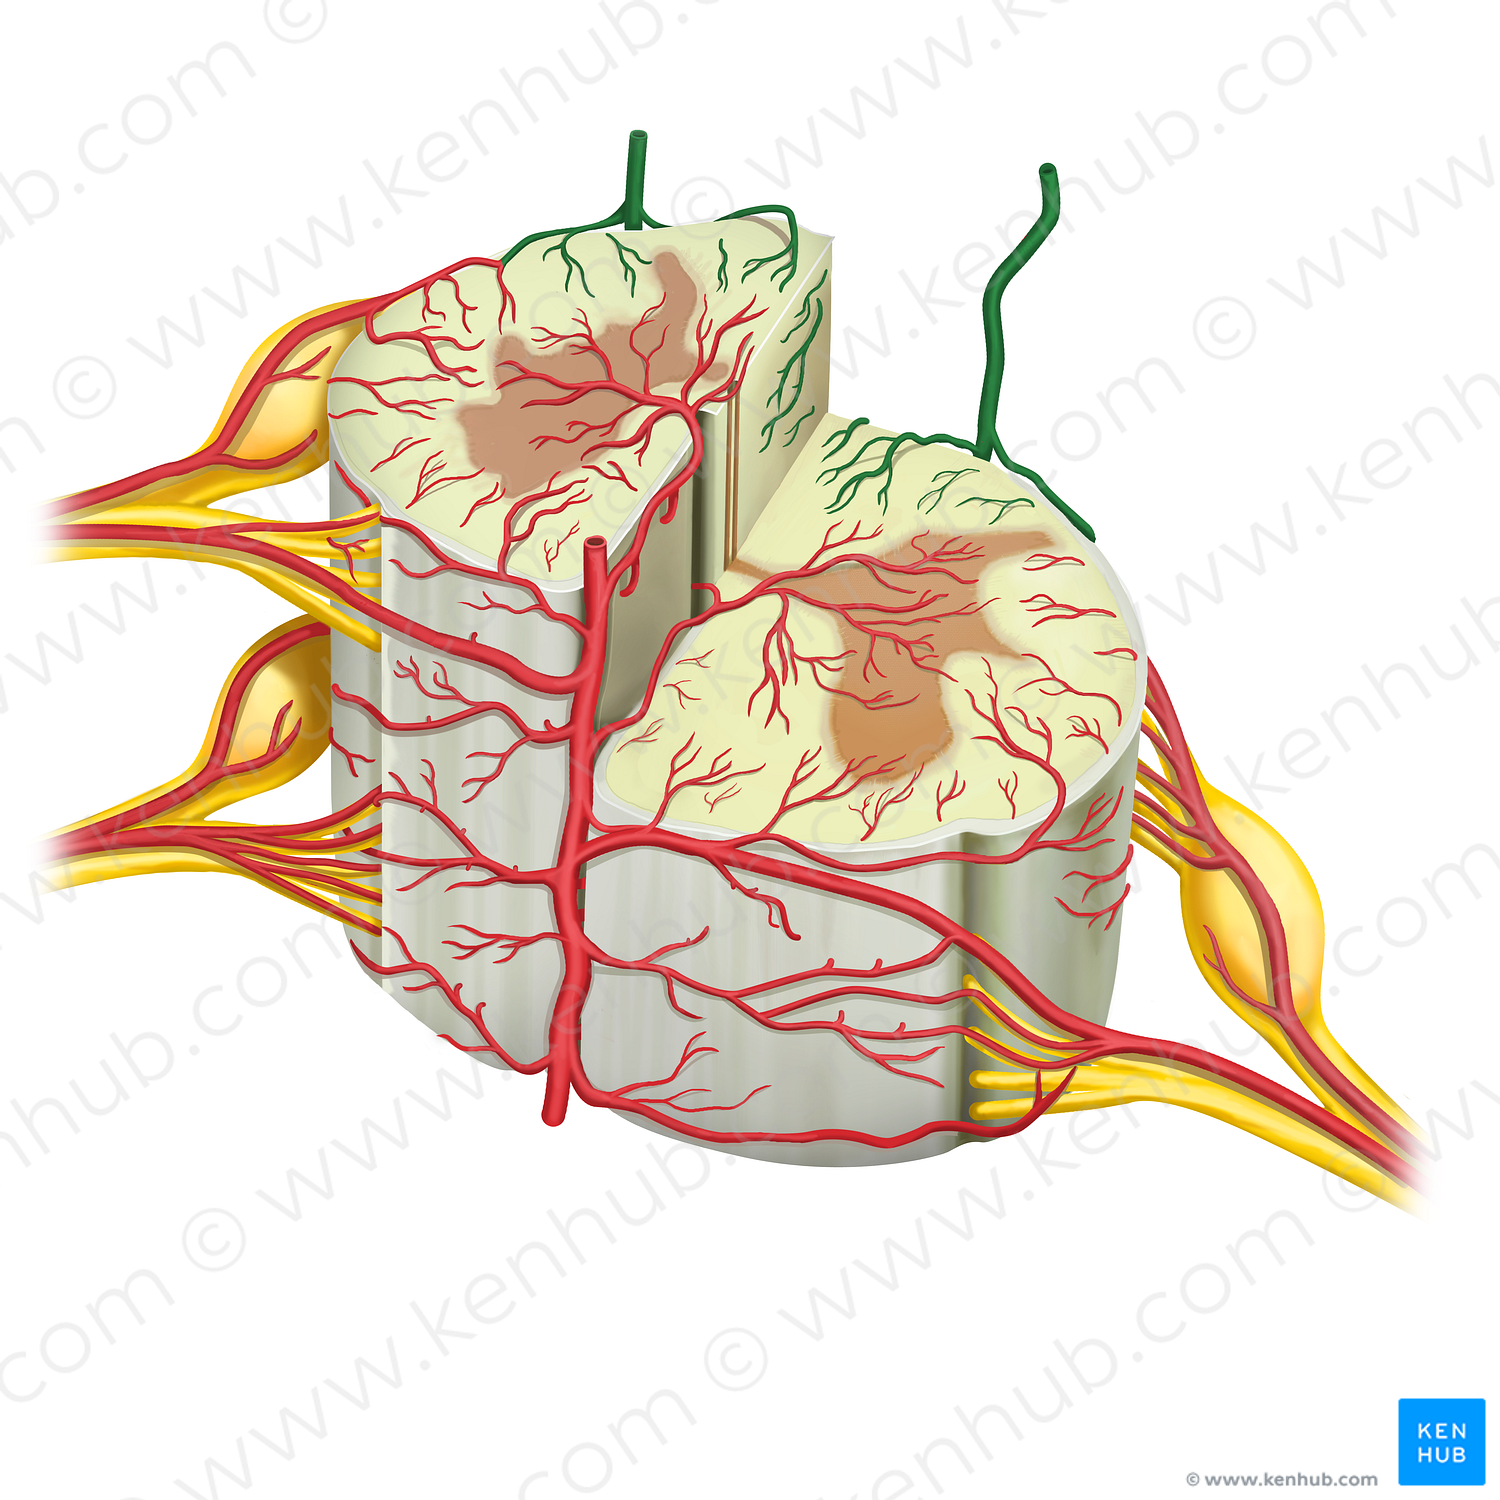 Posterior spinal arteries (#19679)